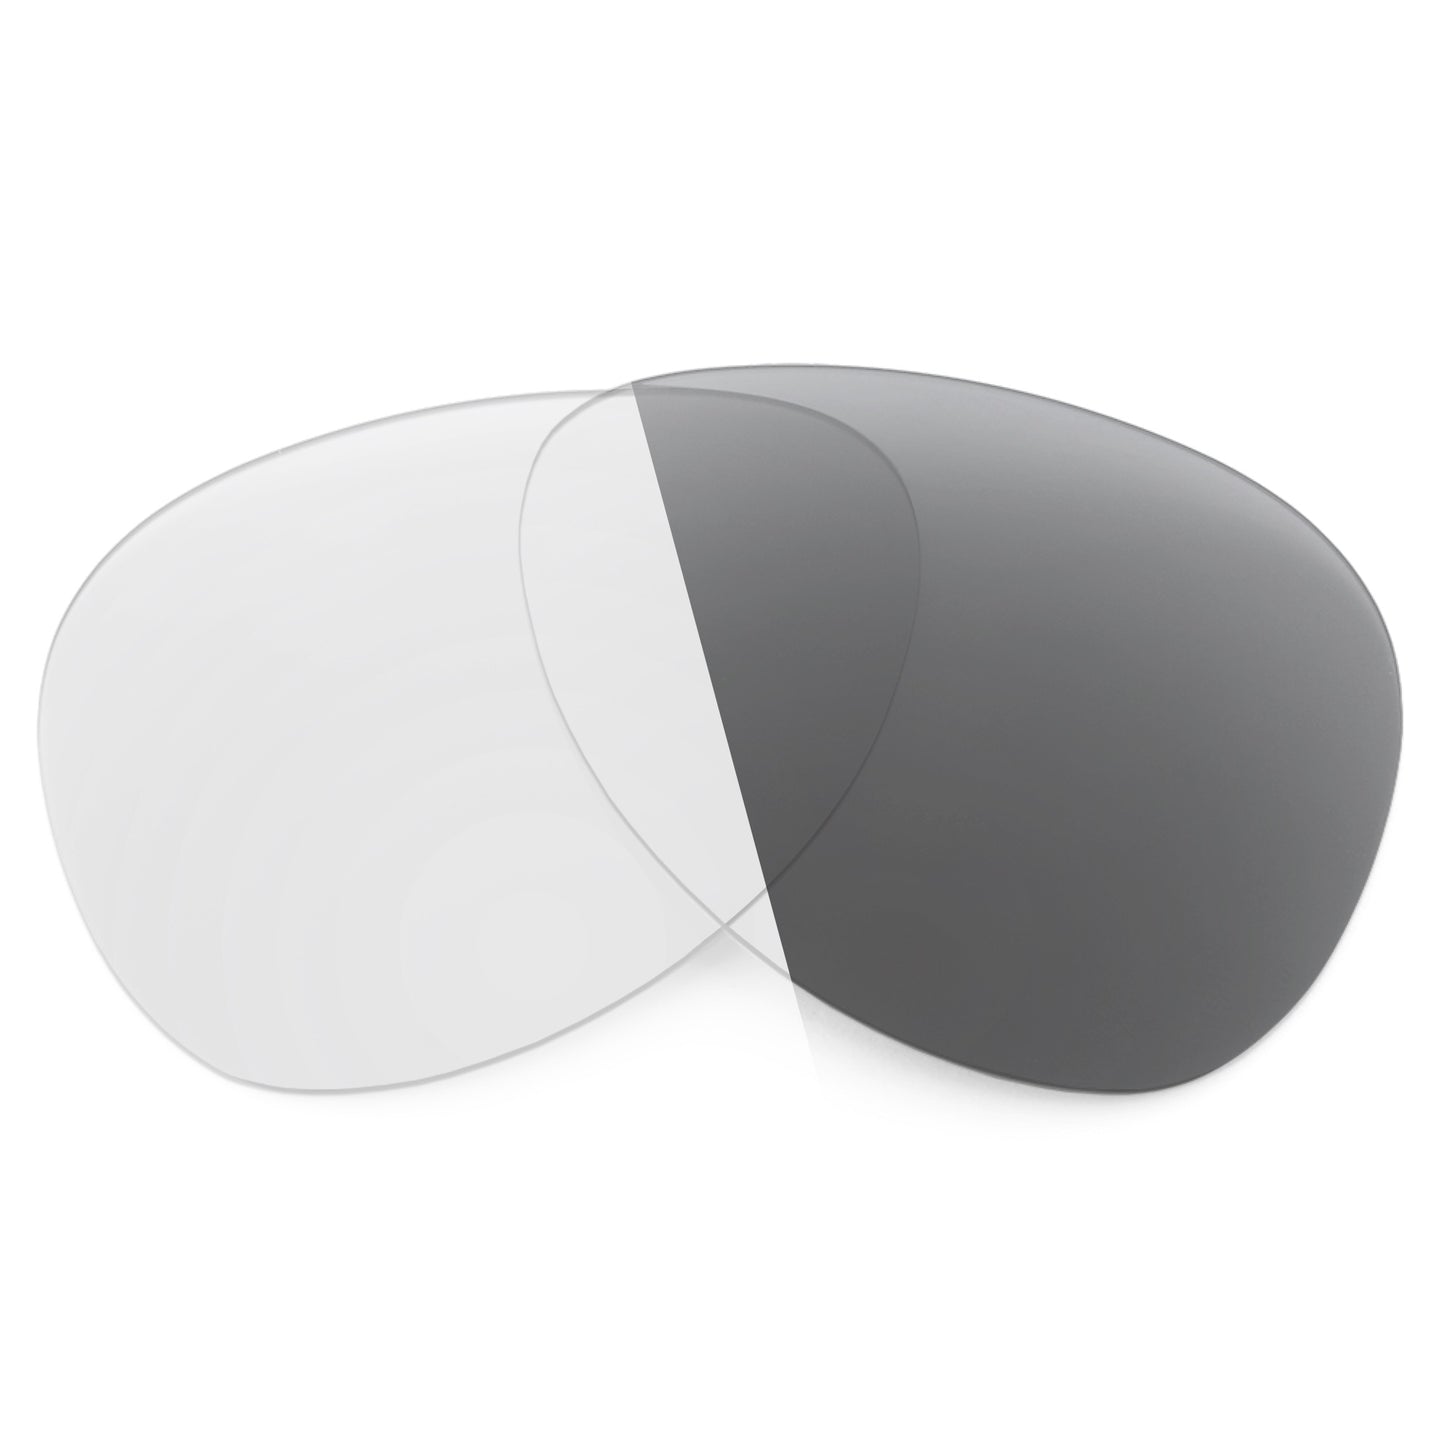 Revant replacement lenses for Ray-Ban RB3549 61mm Non-Polarized Adapt Gray Photochromic